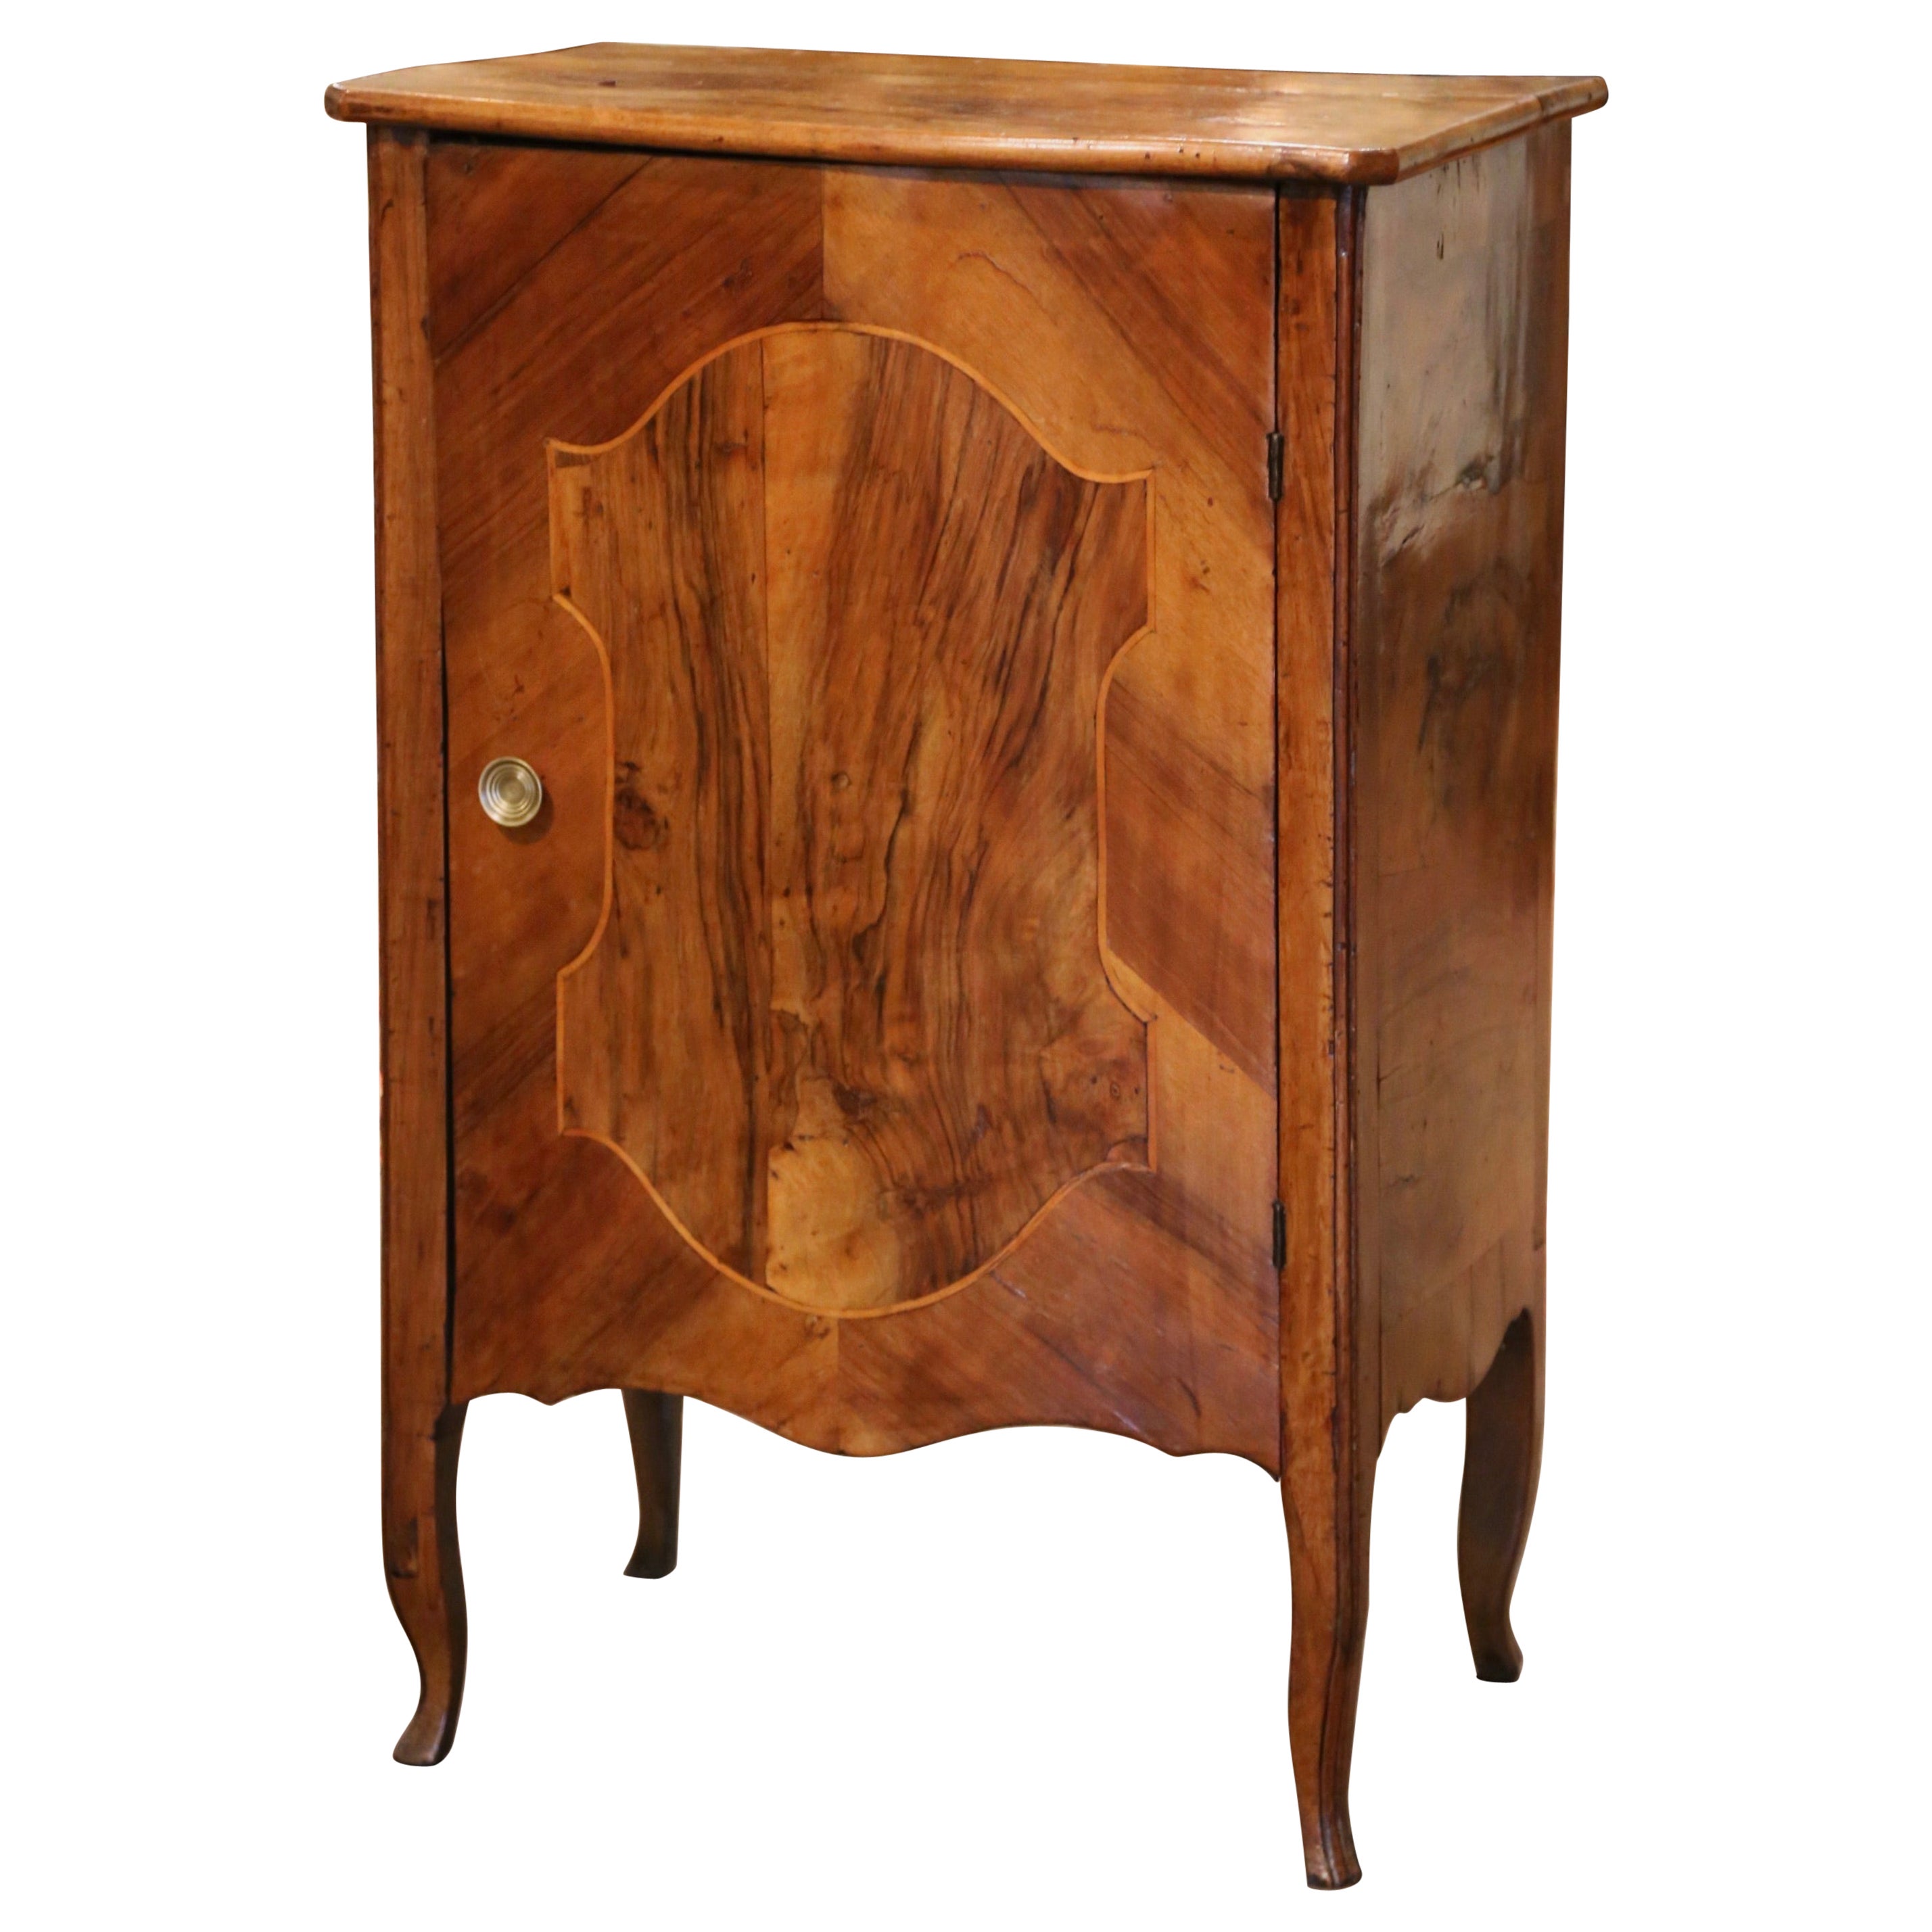 Mid-19th Century French Louis XV Walnut Marquetry Bedside Cabinet Confiturier